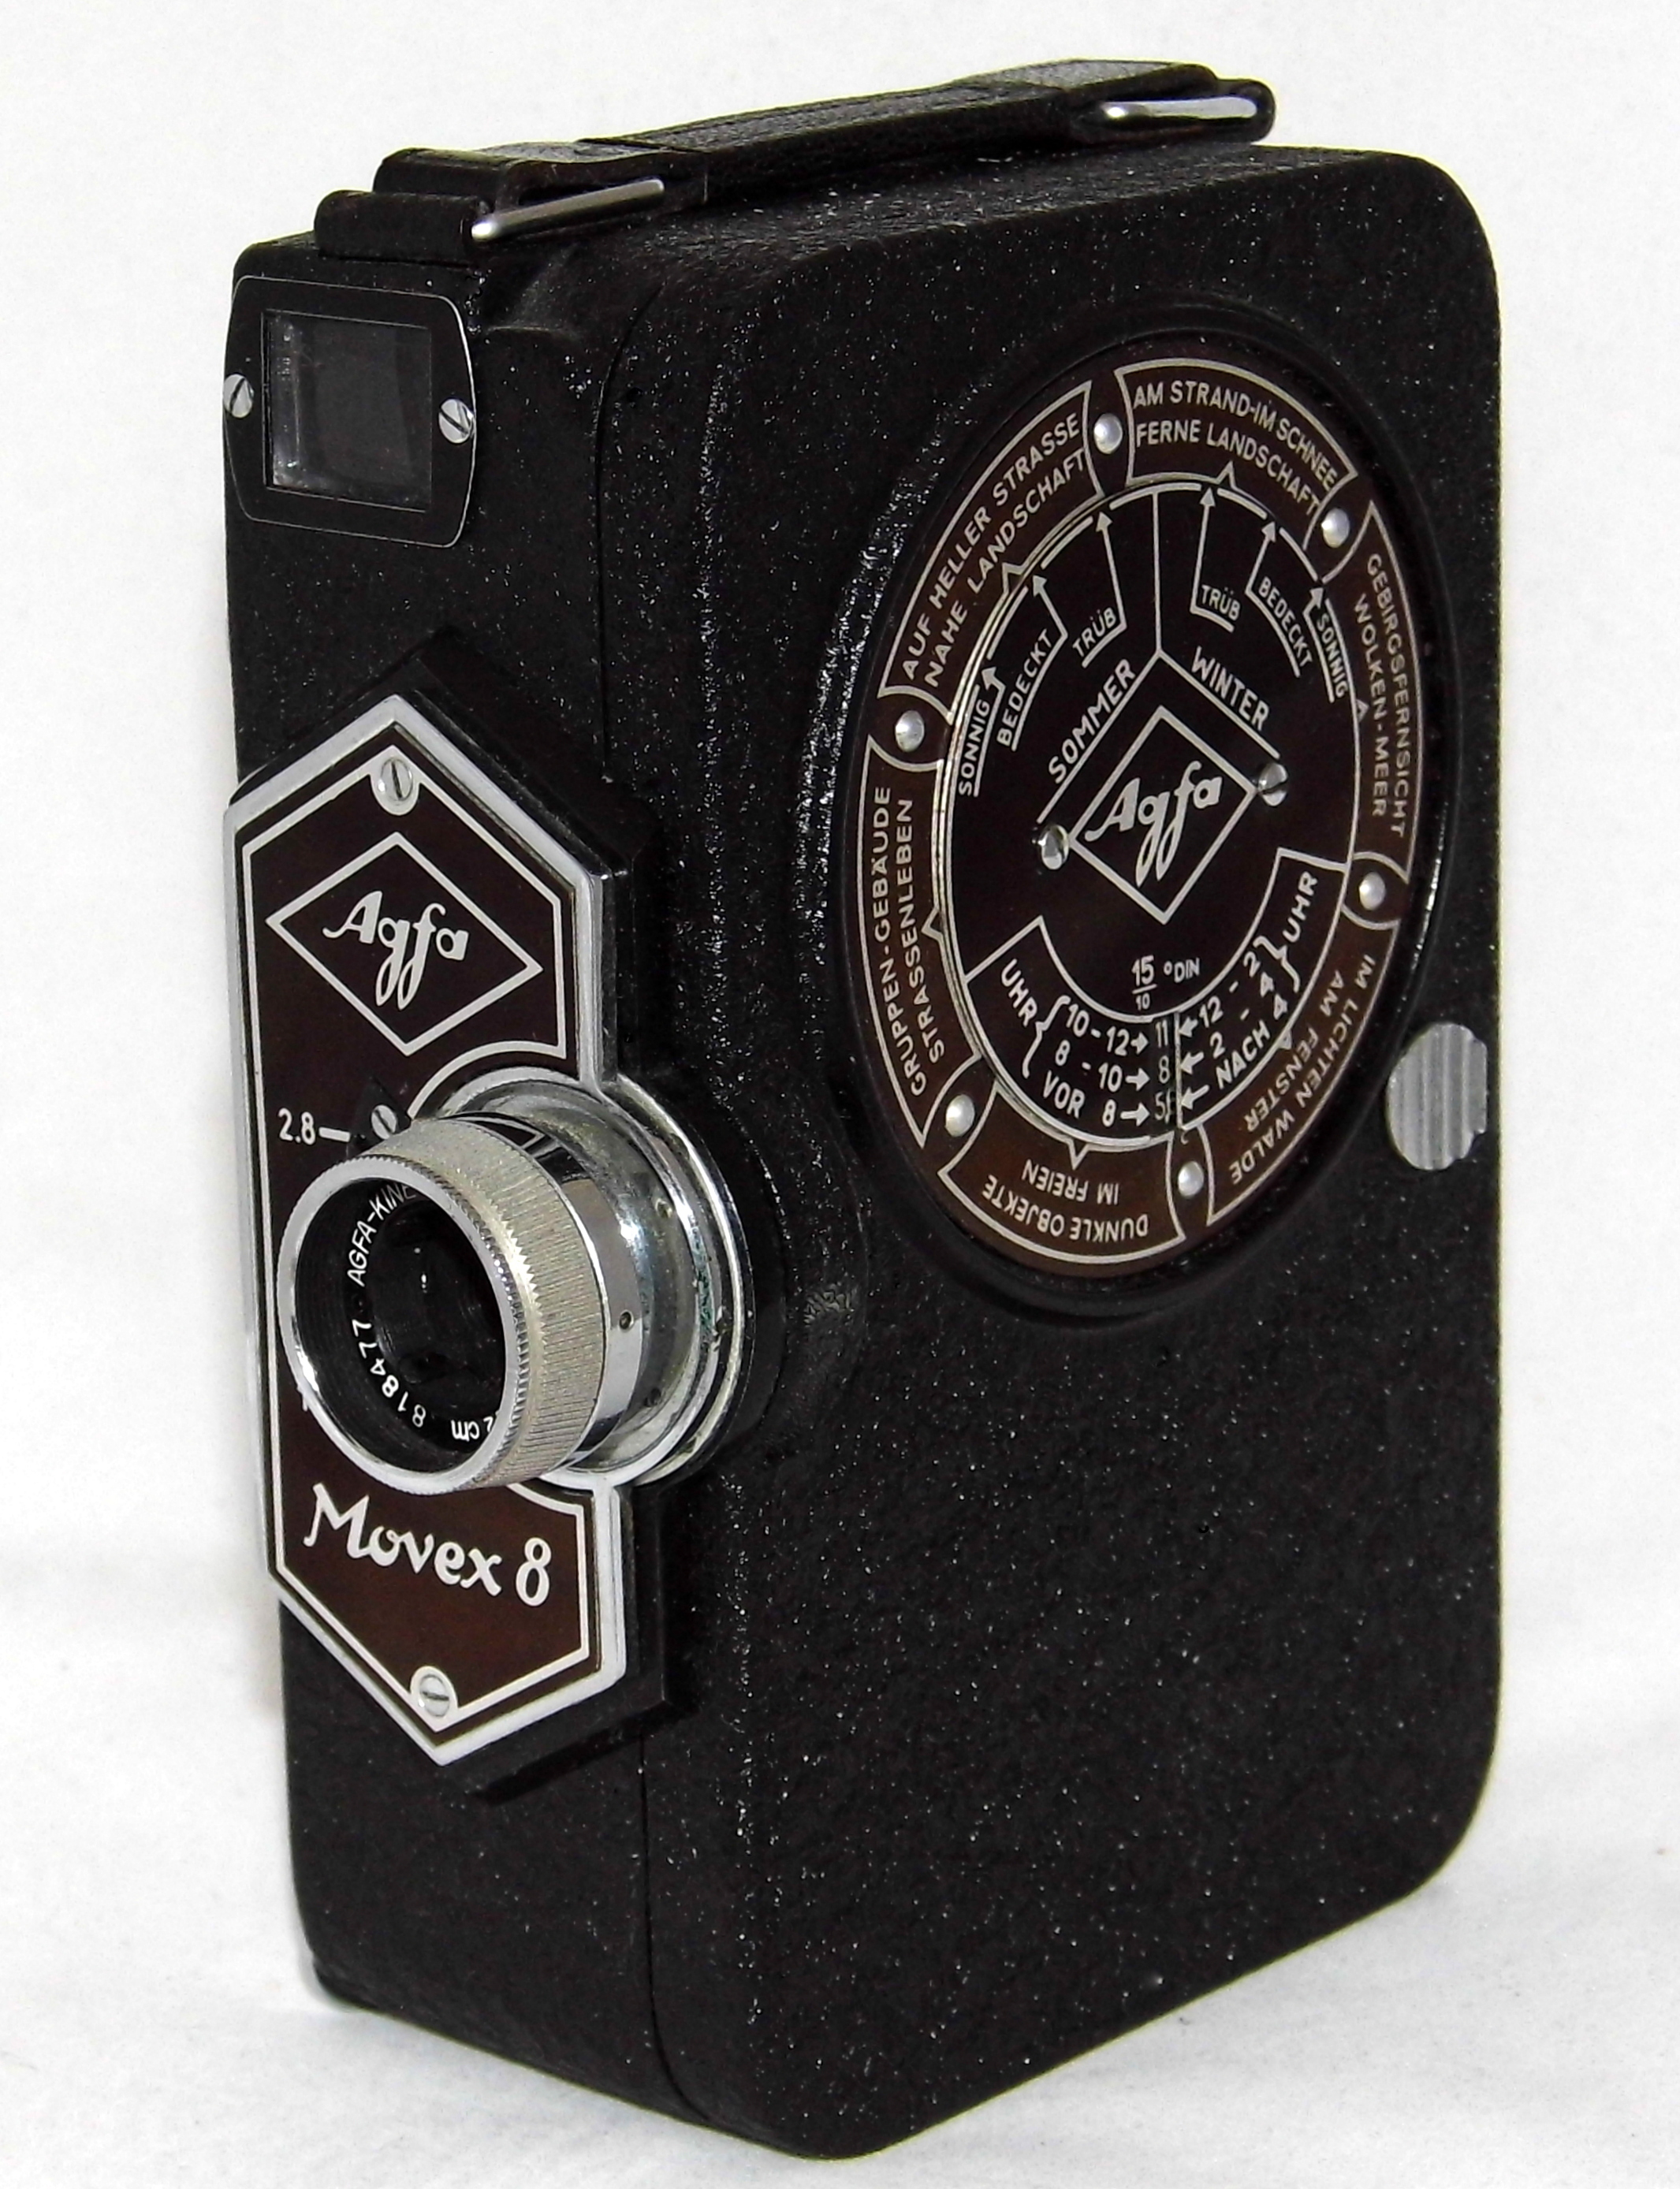 Vintage Agfa Movex 8 Movie Camera, 8-mm, The First Single-8 Camera To Use Film In A Cartridge, Made In Germany, Circa 1937 (21340841356)